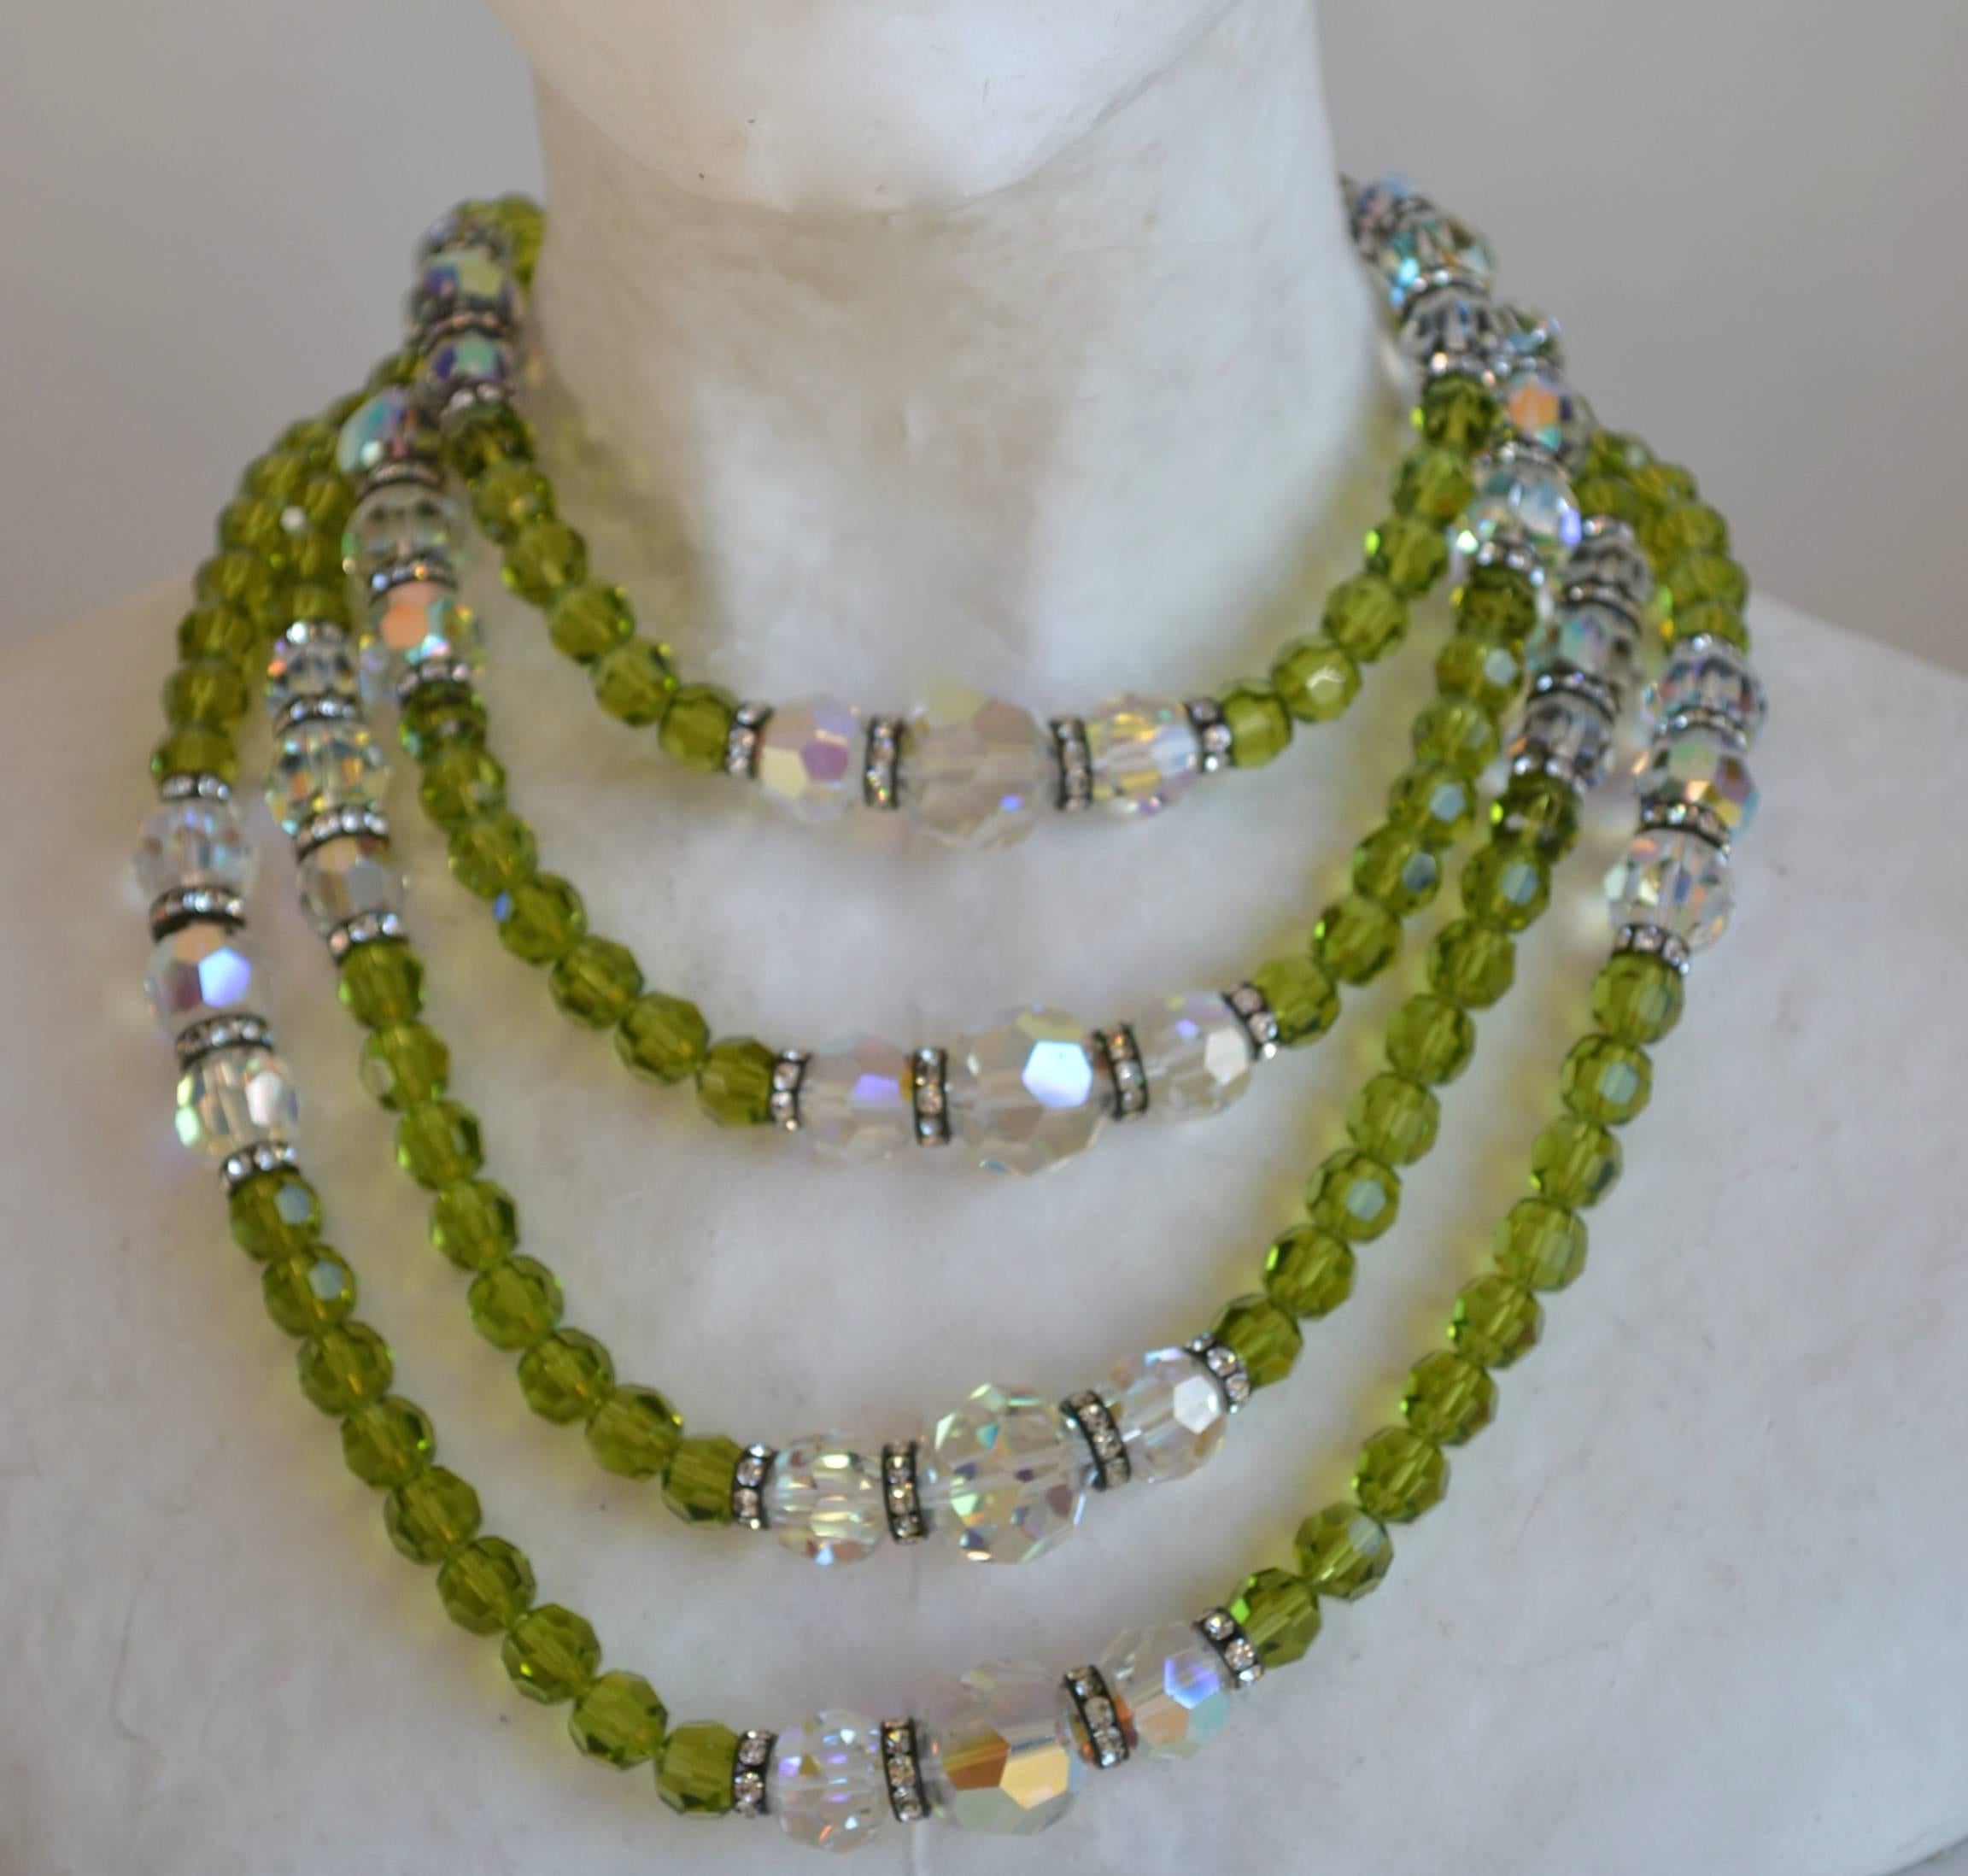 Multi row hand cut green and clear glass beads with Swarovski crystal rondelles from Francoise Montague. 

Shortest row is 15